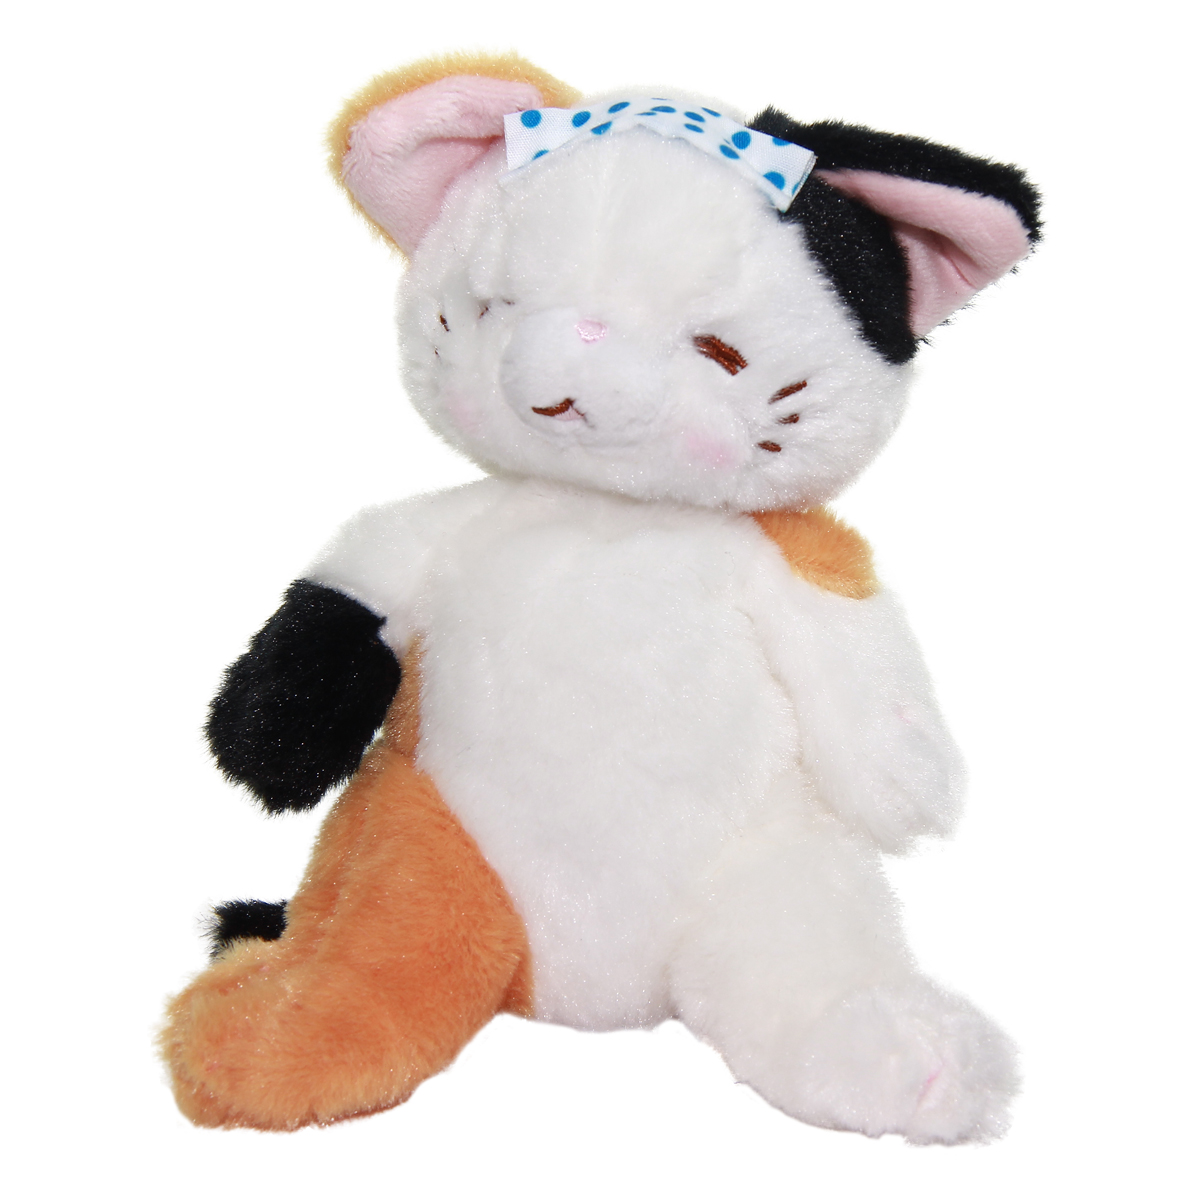 Cat Plush Doll, Hot Springs Collection, Stuffed Animal Toy, White Mix, 6 Inches